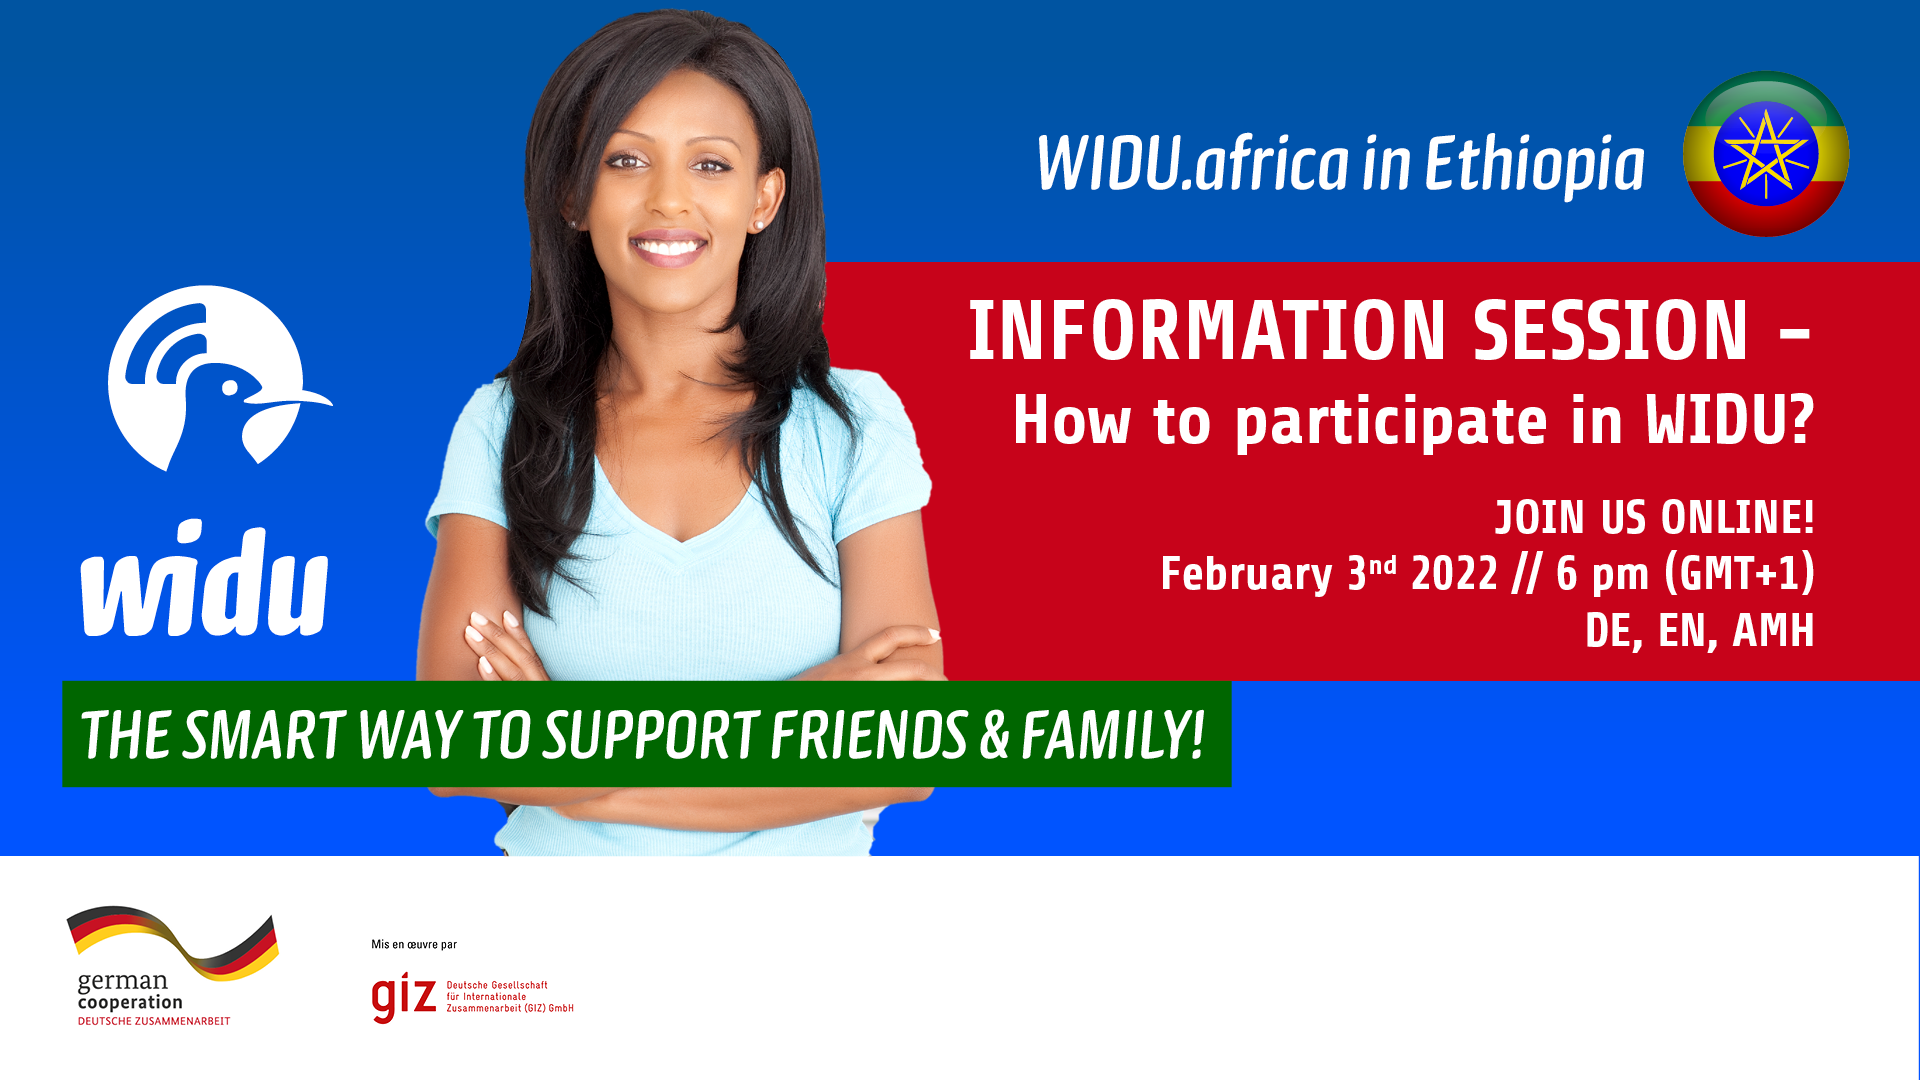 Information Session - How to participate in WIDU?